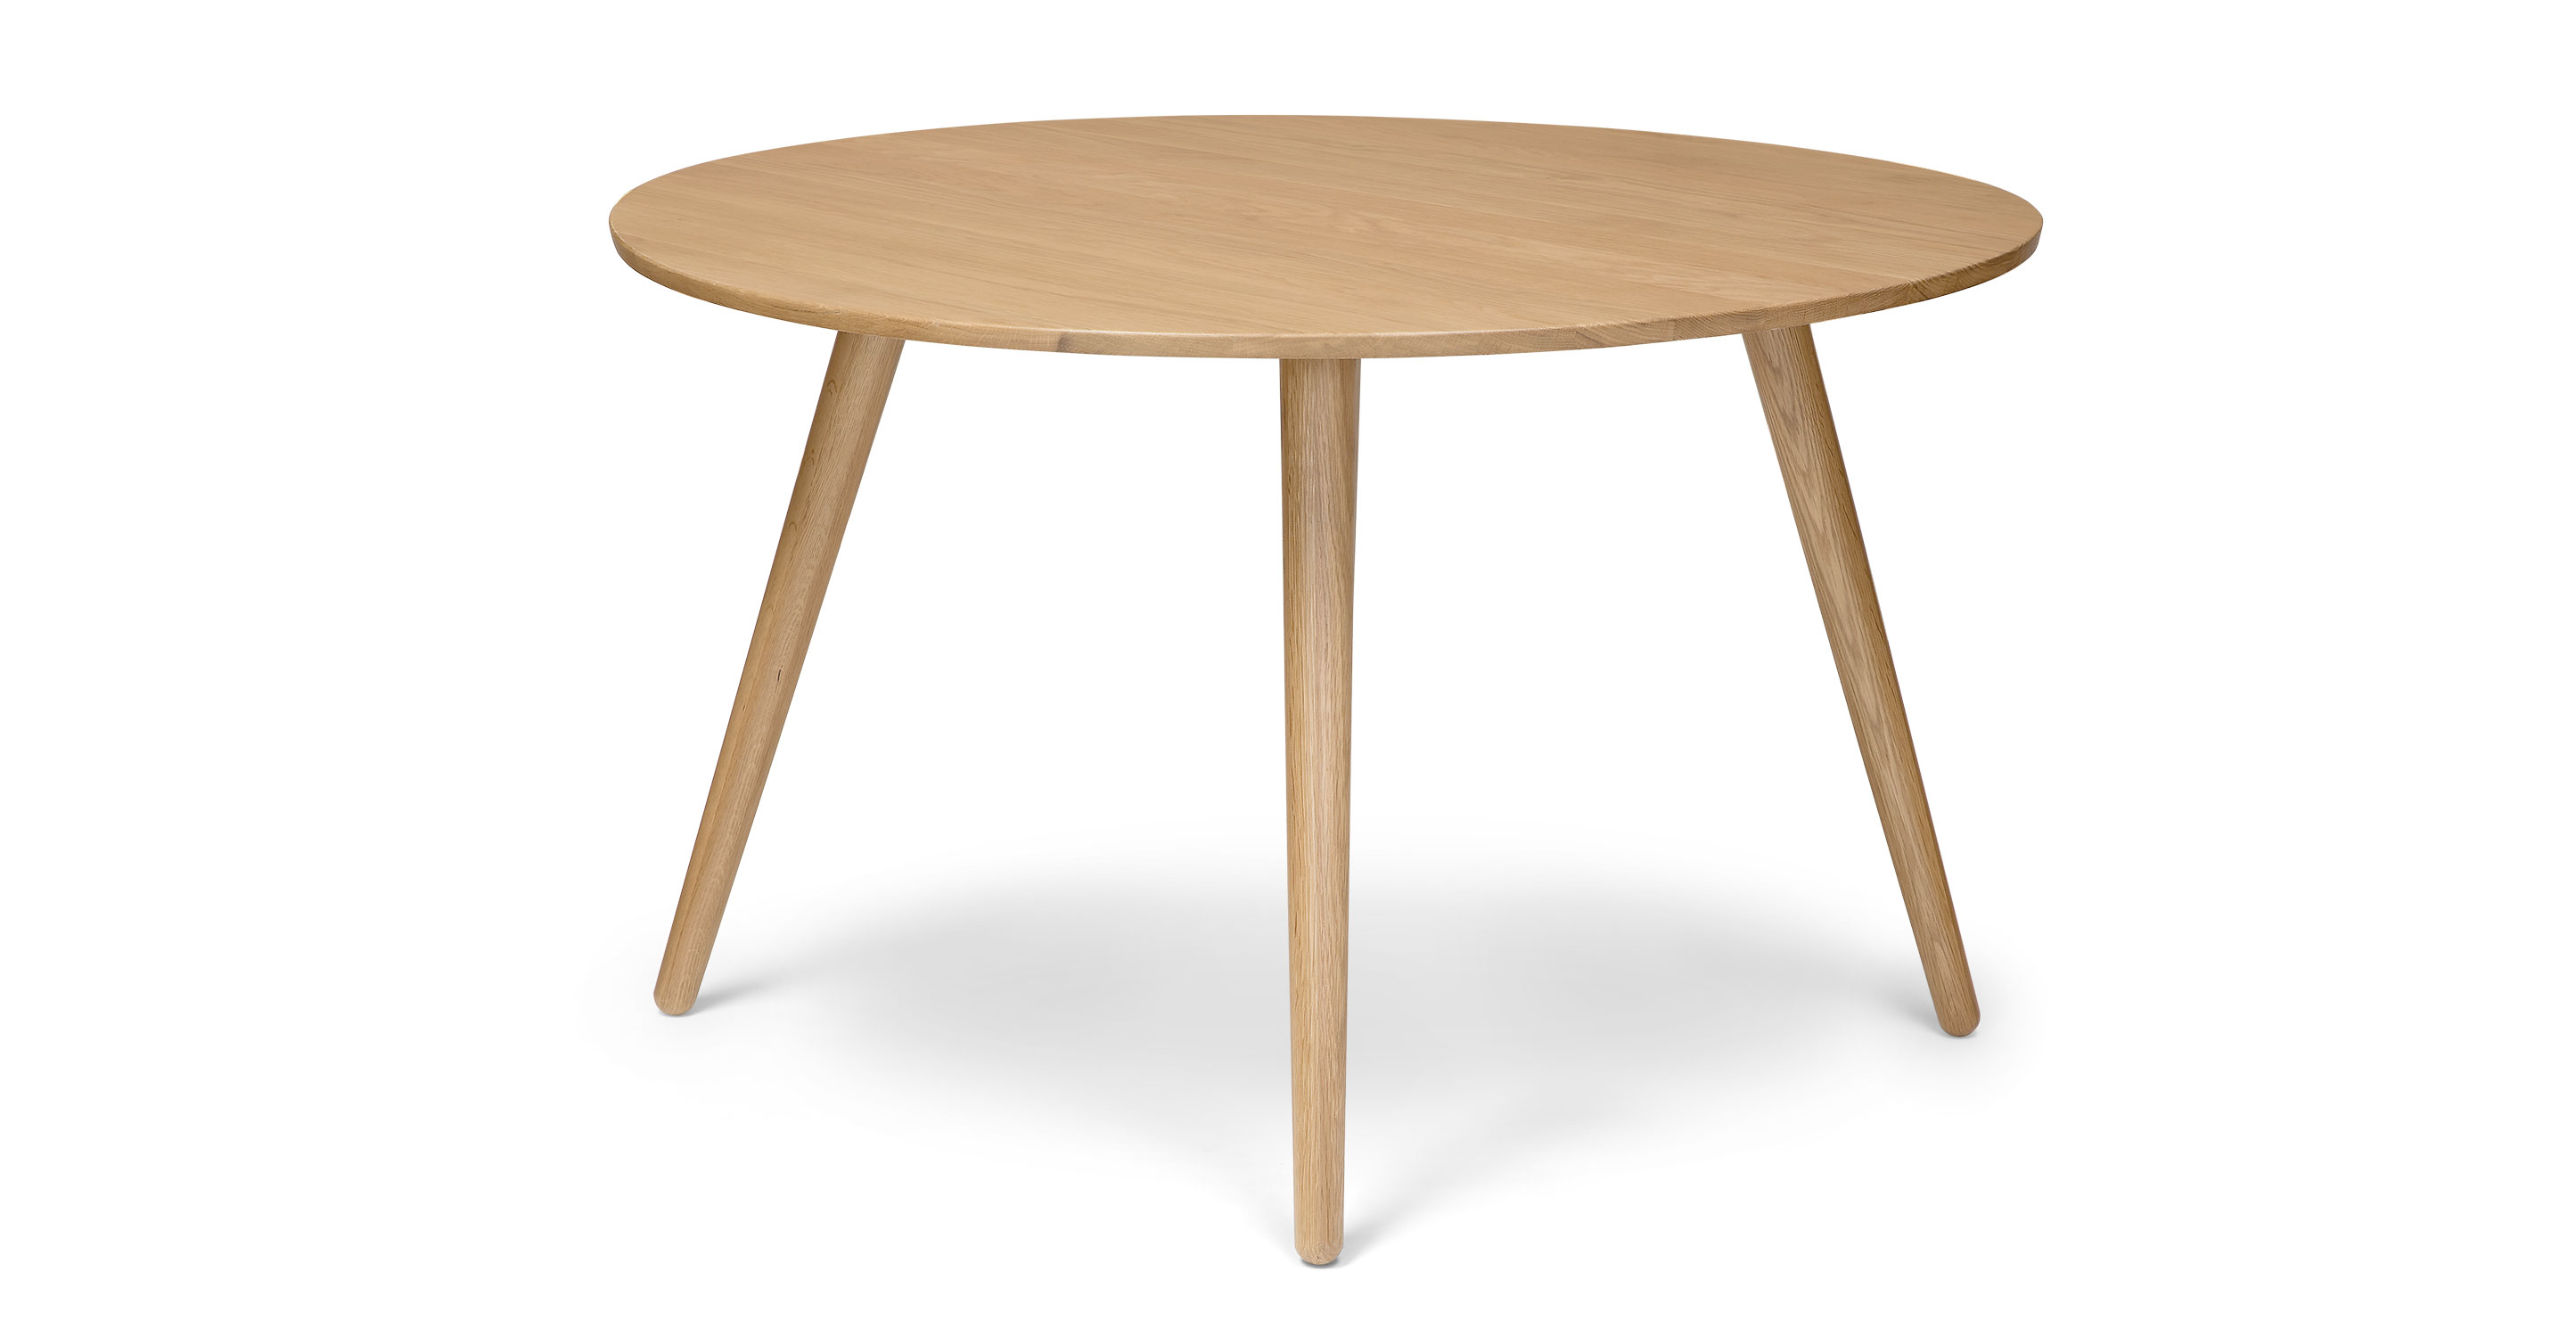 Round Oak Wood Dining Table For 4, Oak Round Kitchen Table